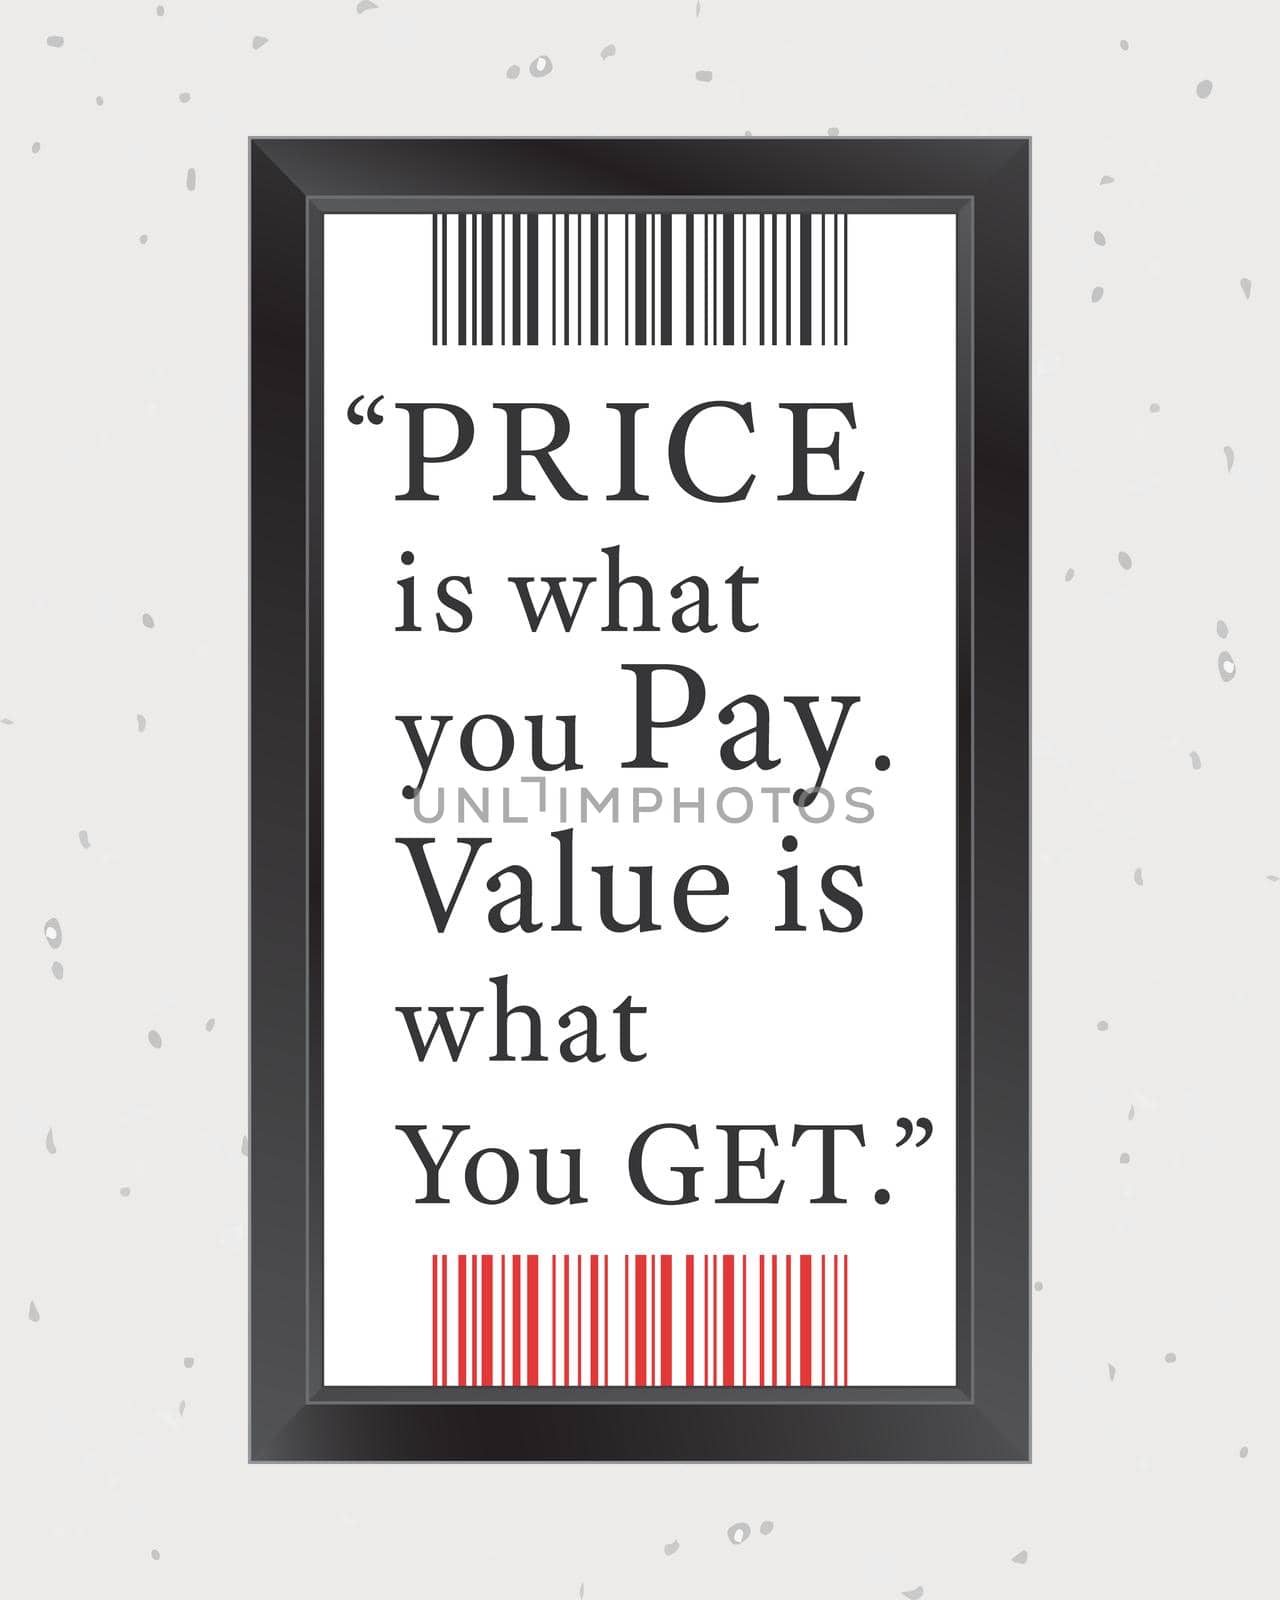 Quote Motivational Square. Inspirational Quote. Price is what you pay. Value is what you get. Value is what you get. Vector illustration.